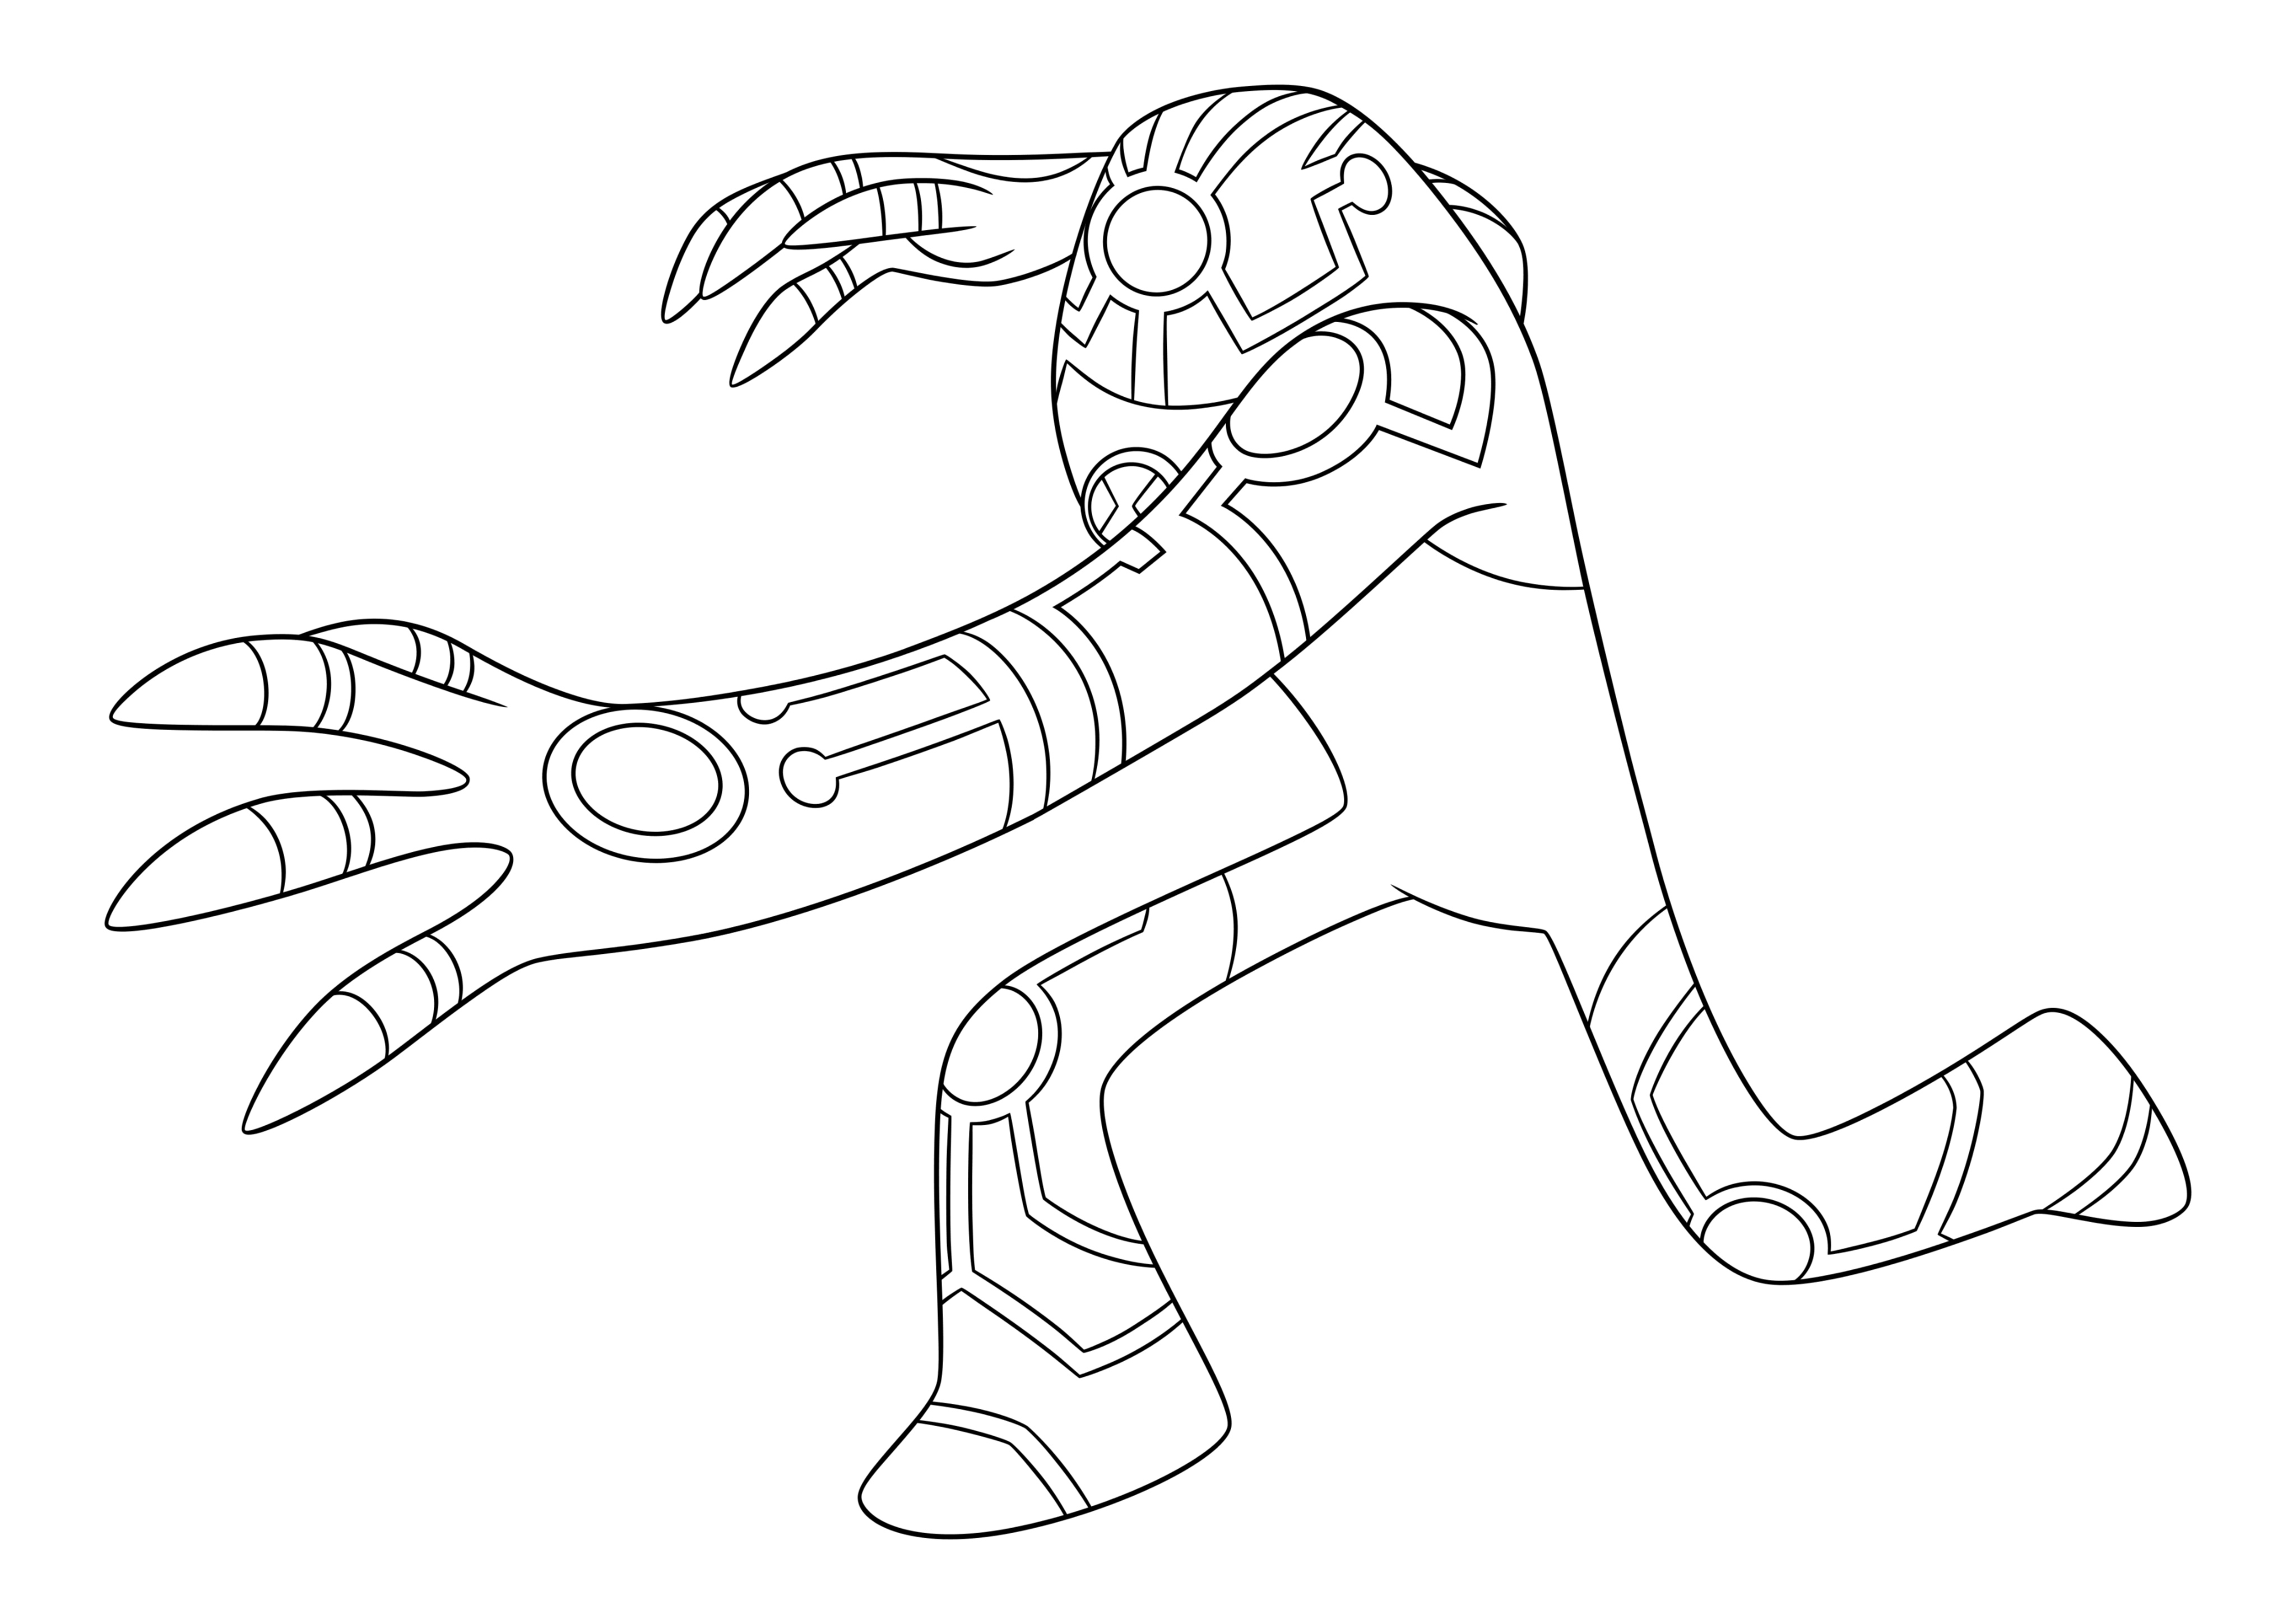 Print Ben 10 Coloring Pages for free.